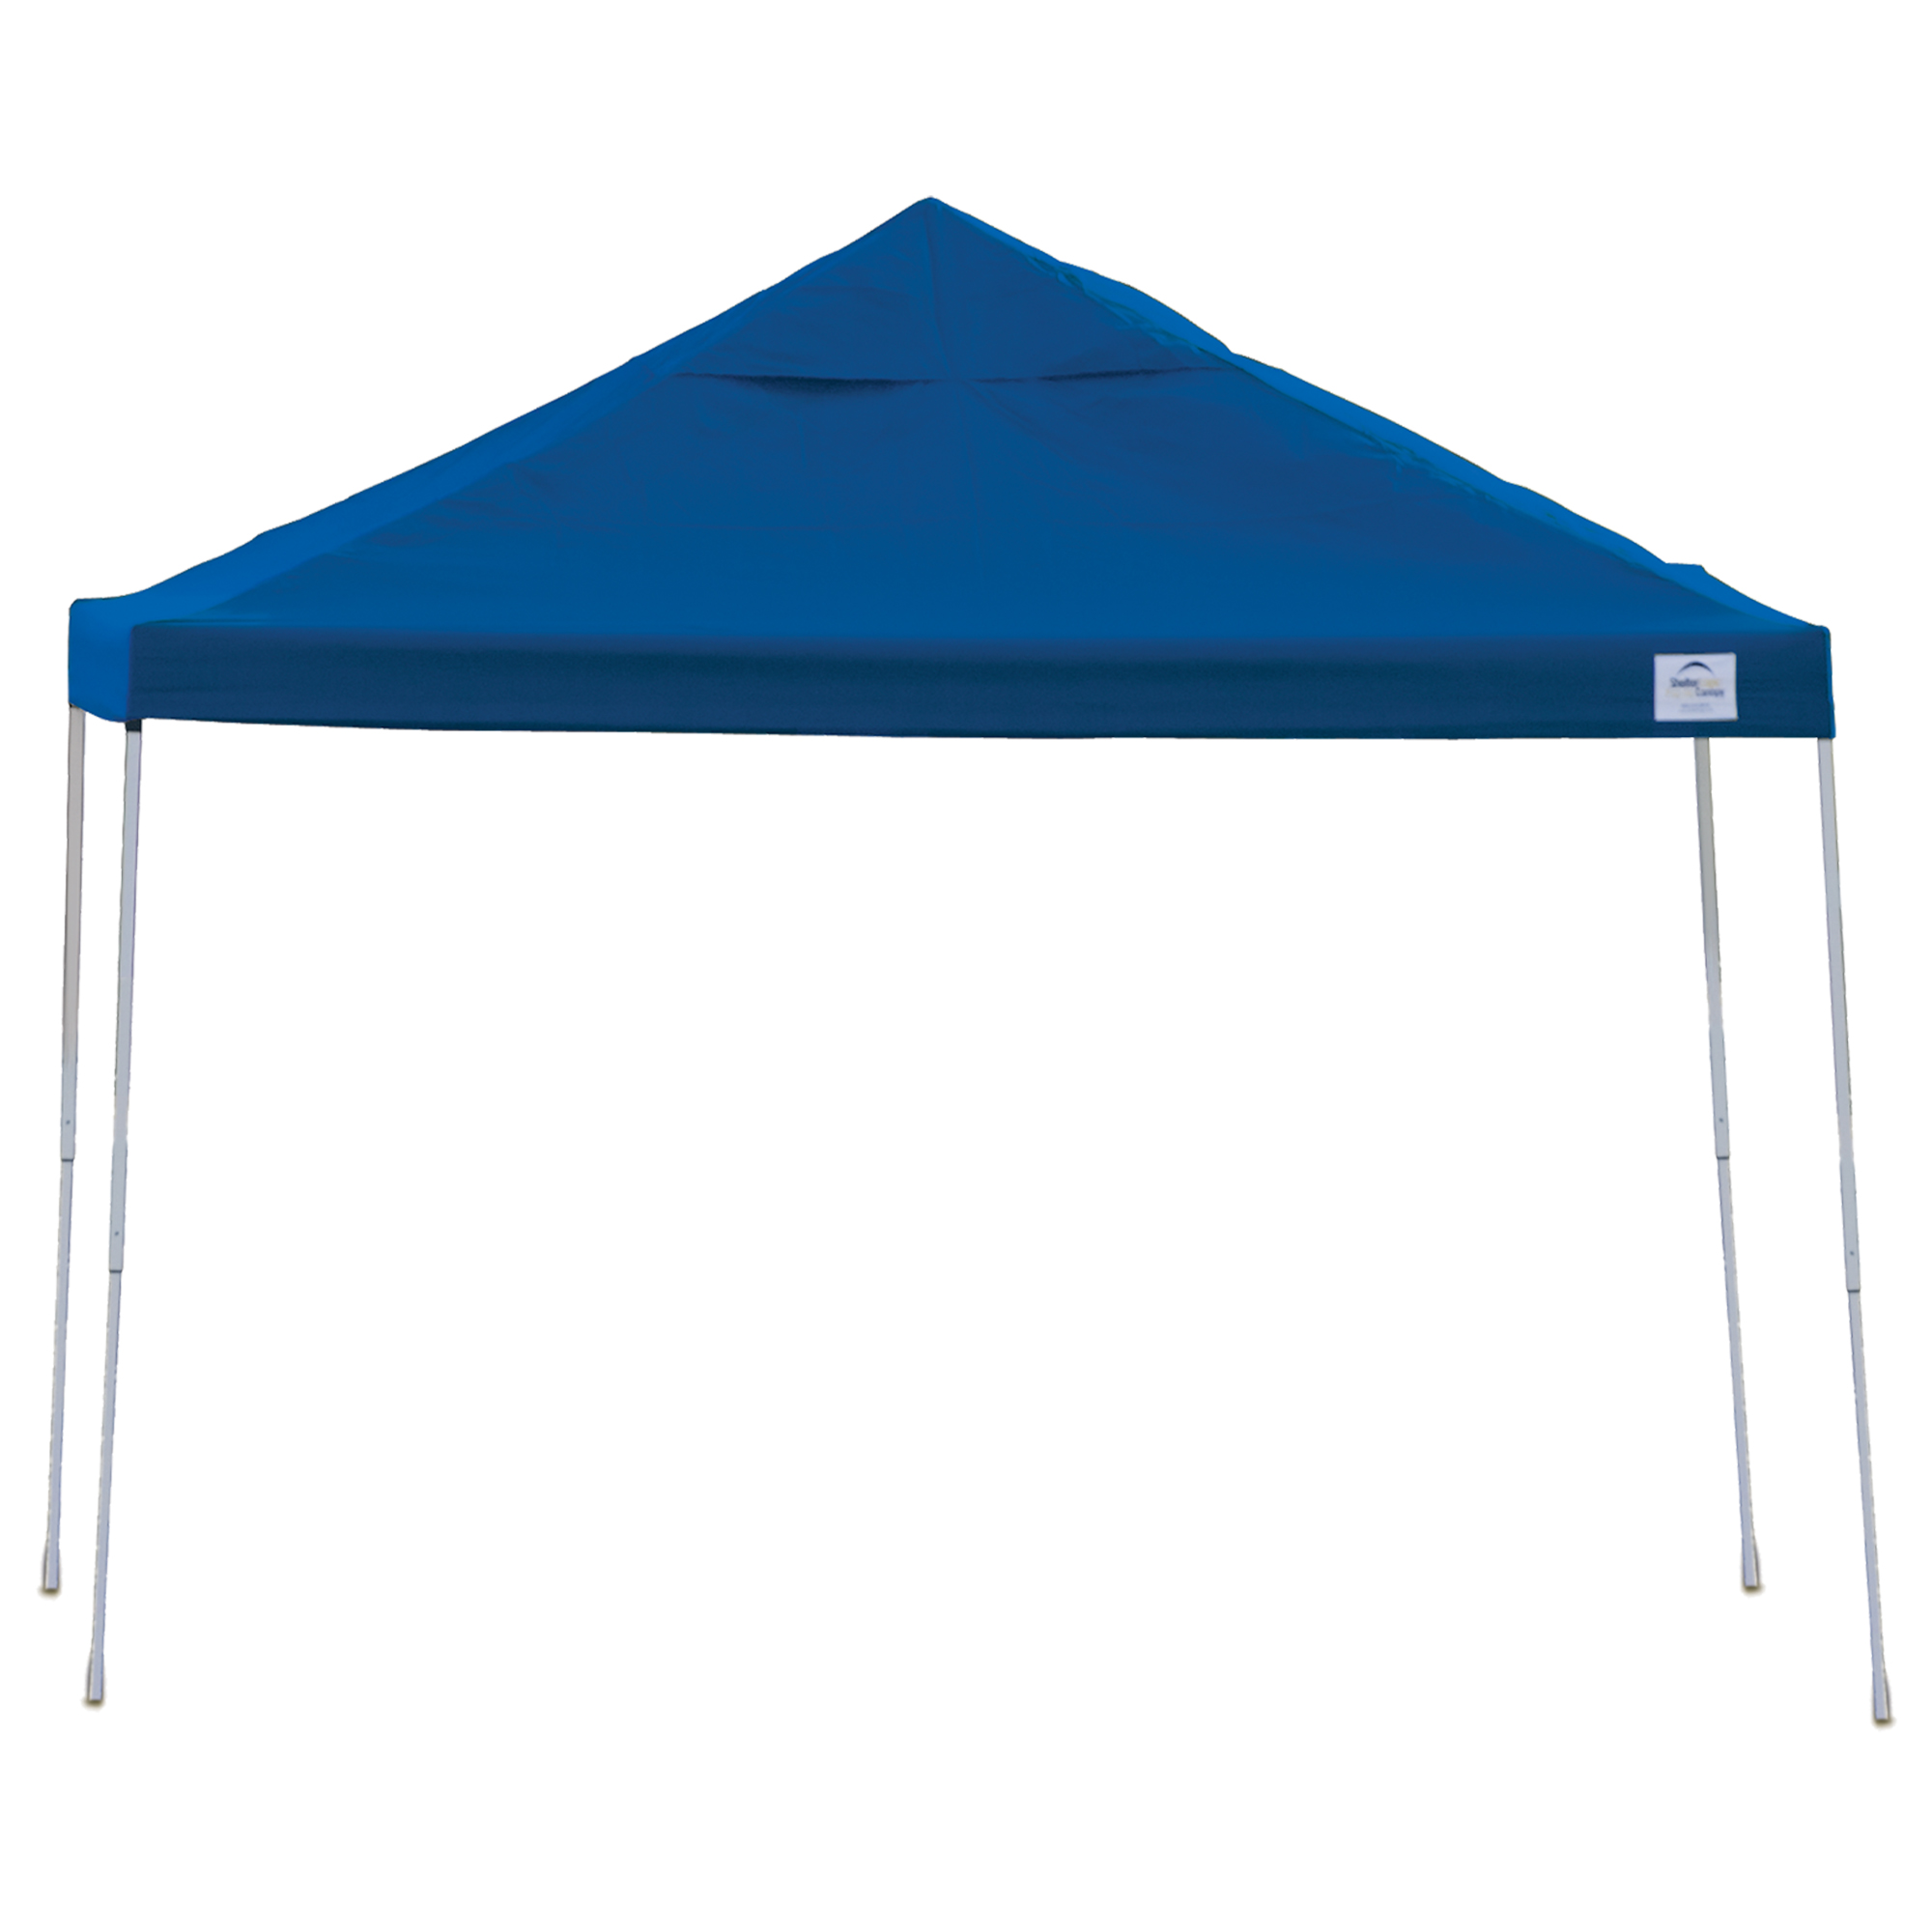 12ft. X 12 Ft. Pro Pop-up Canopy Straight Leg, Blue Cover